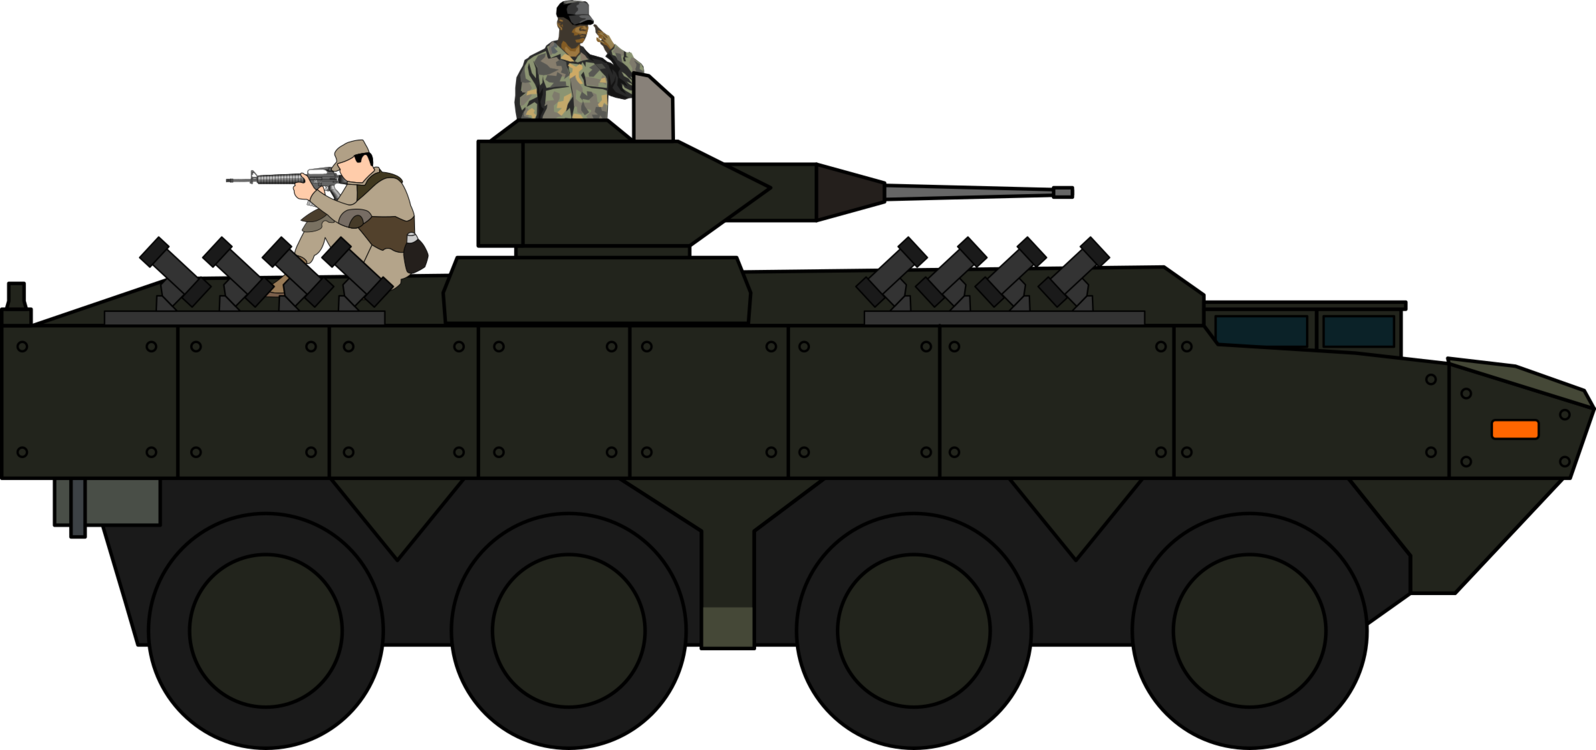 M113 Armored Personnel Carrier,Tank,Churchill Tank